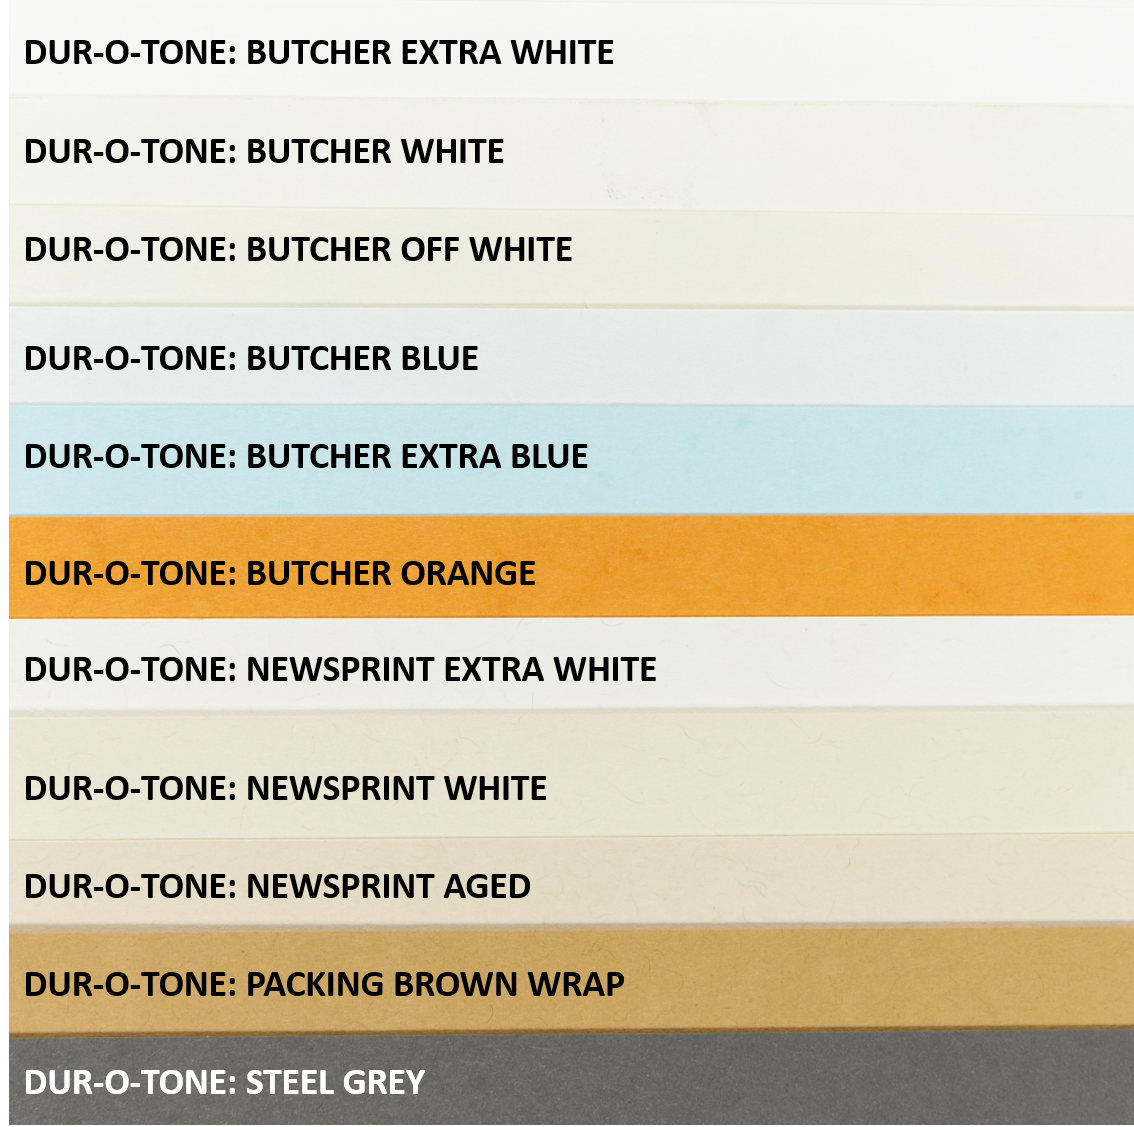 Butcher Off White Cardstock (Dur-O-Tone, Cover Weight)